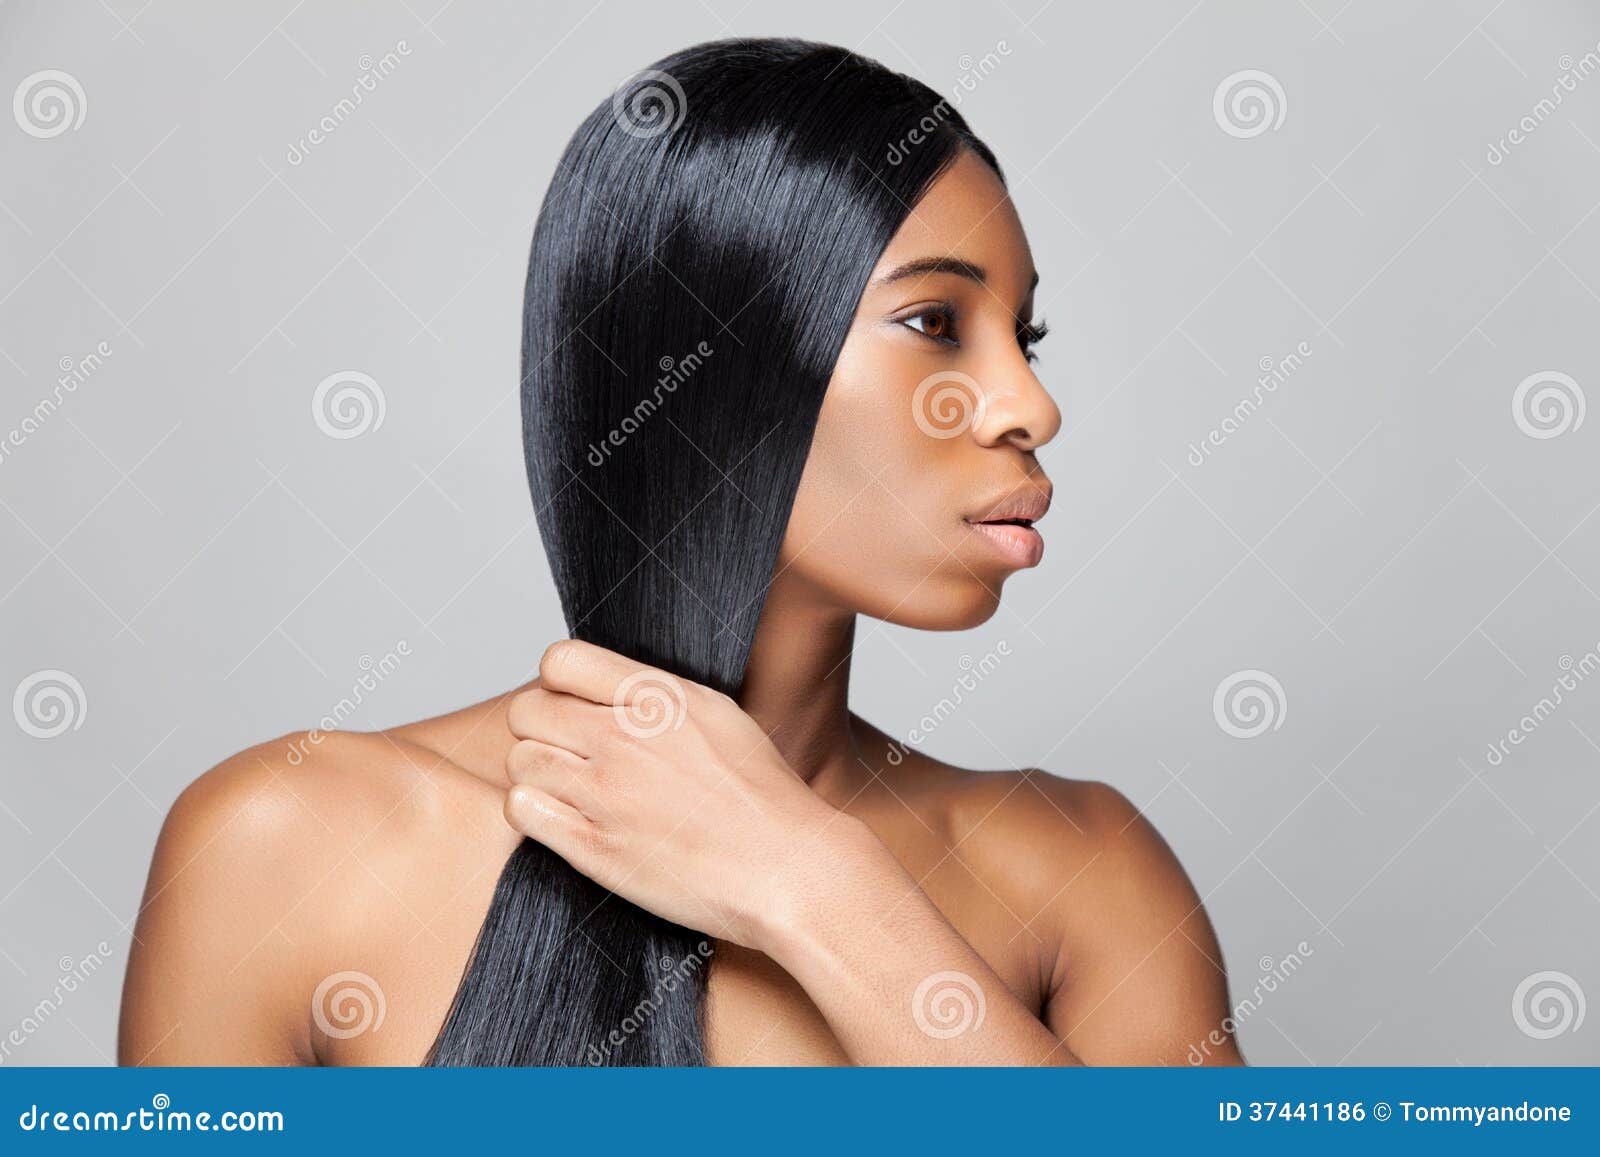 beautiful black woman with long straight hair